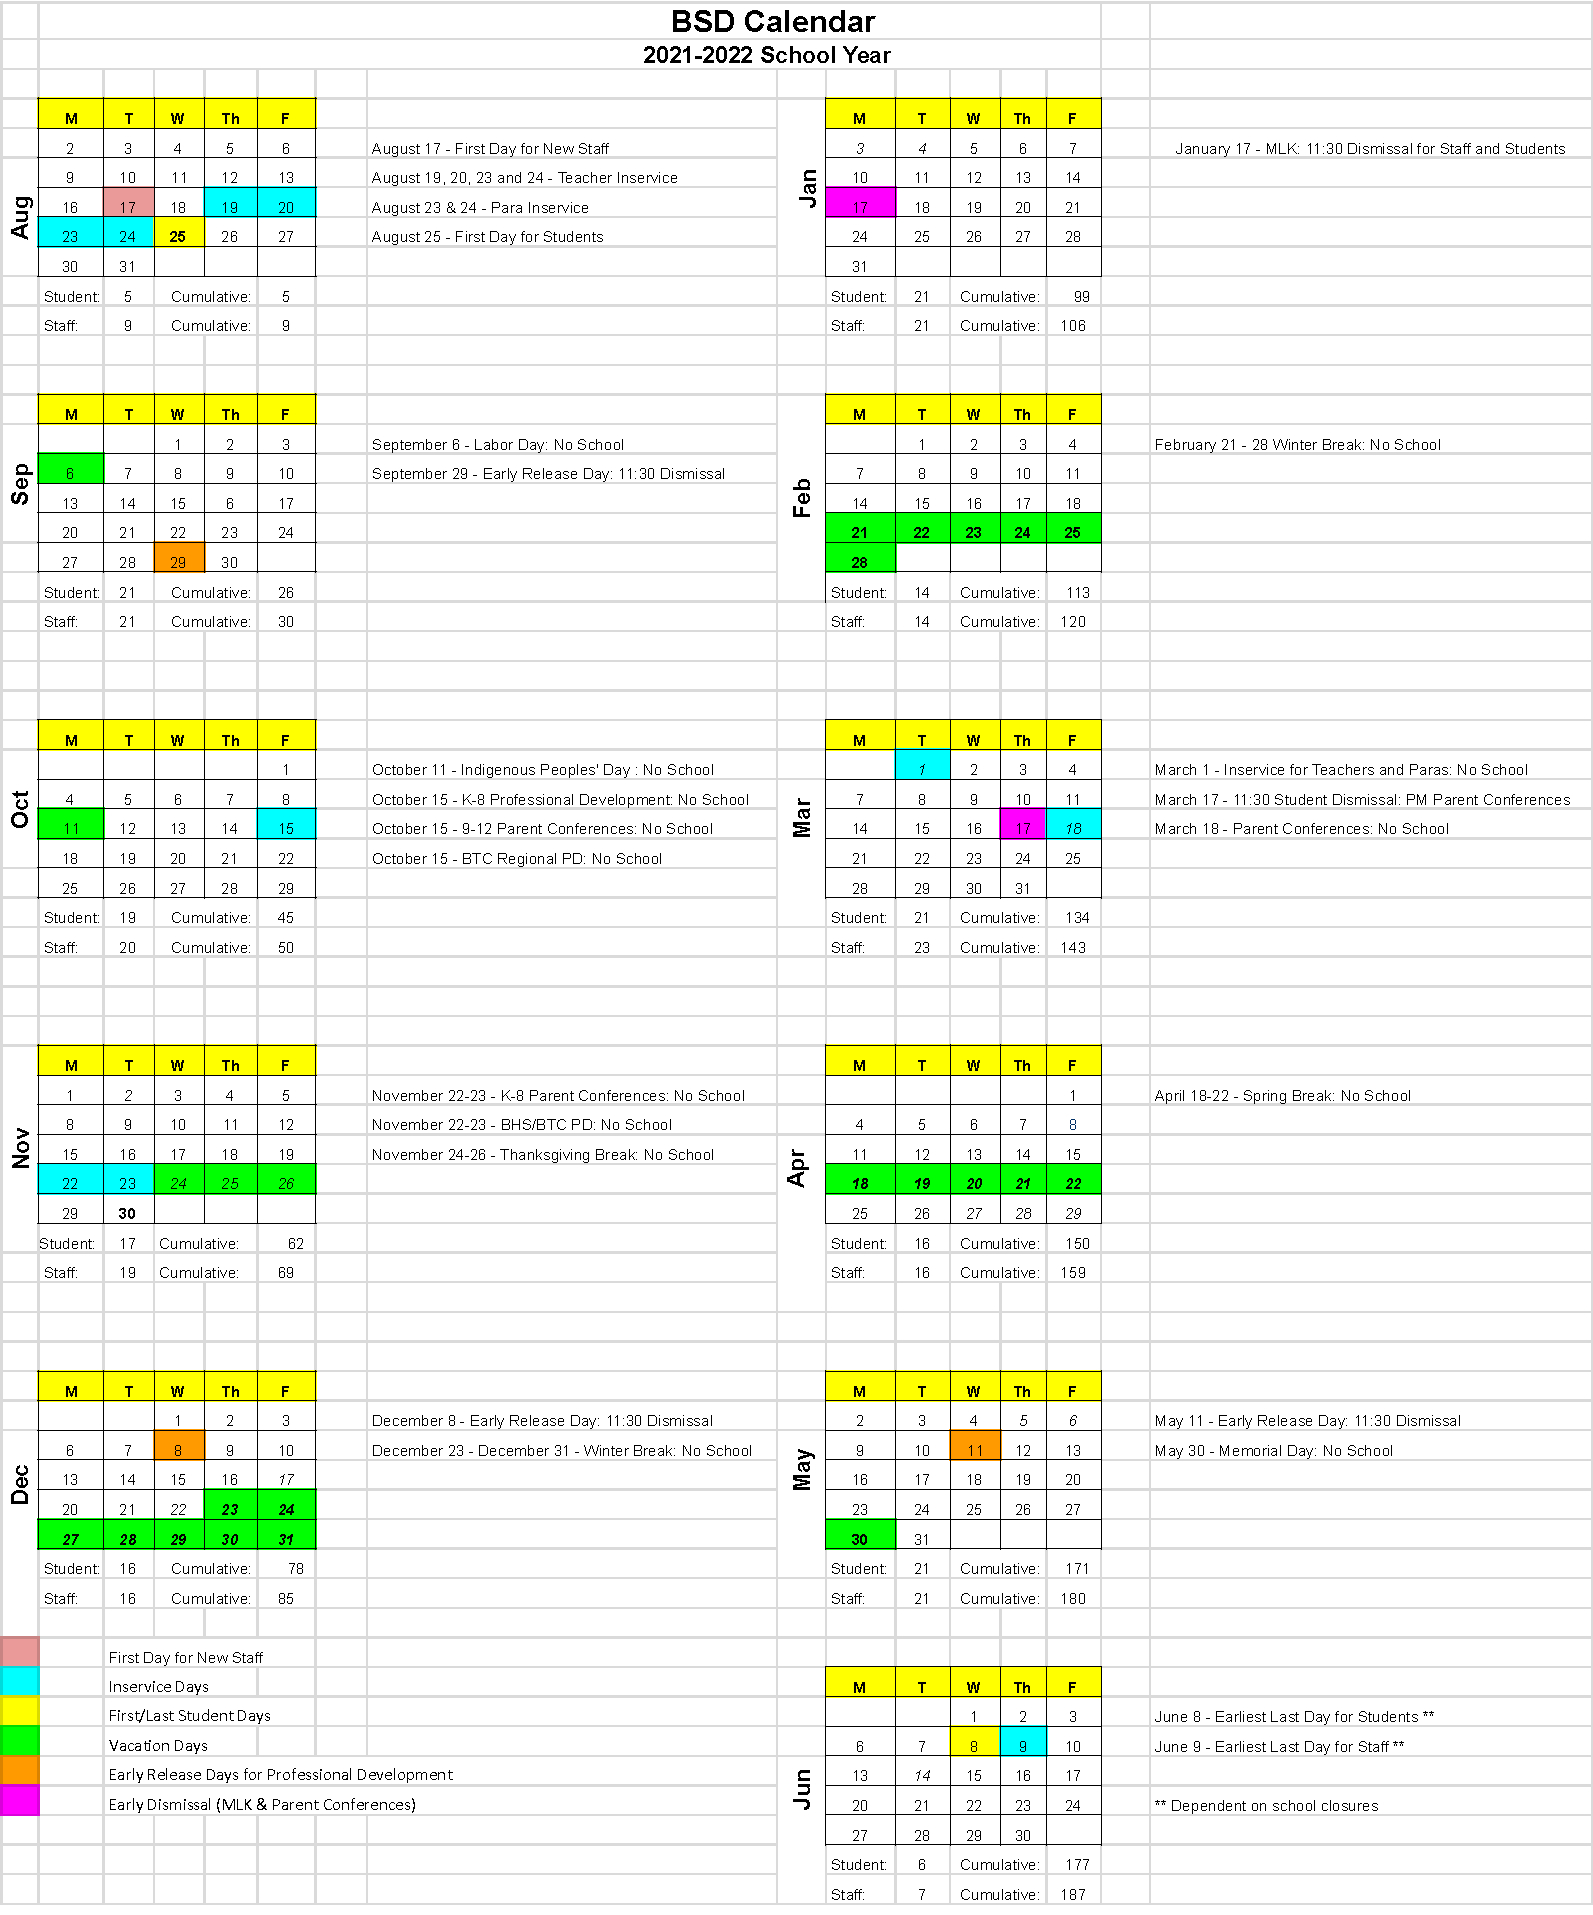 Youth Group Promotions Calendar 2022 [Latest Revision